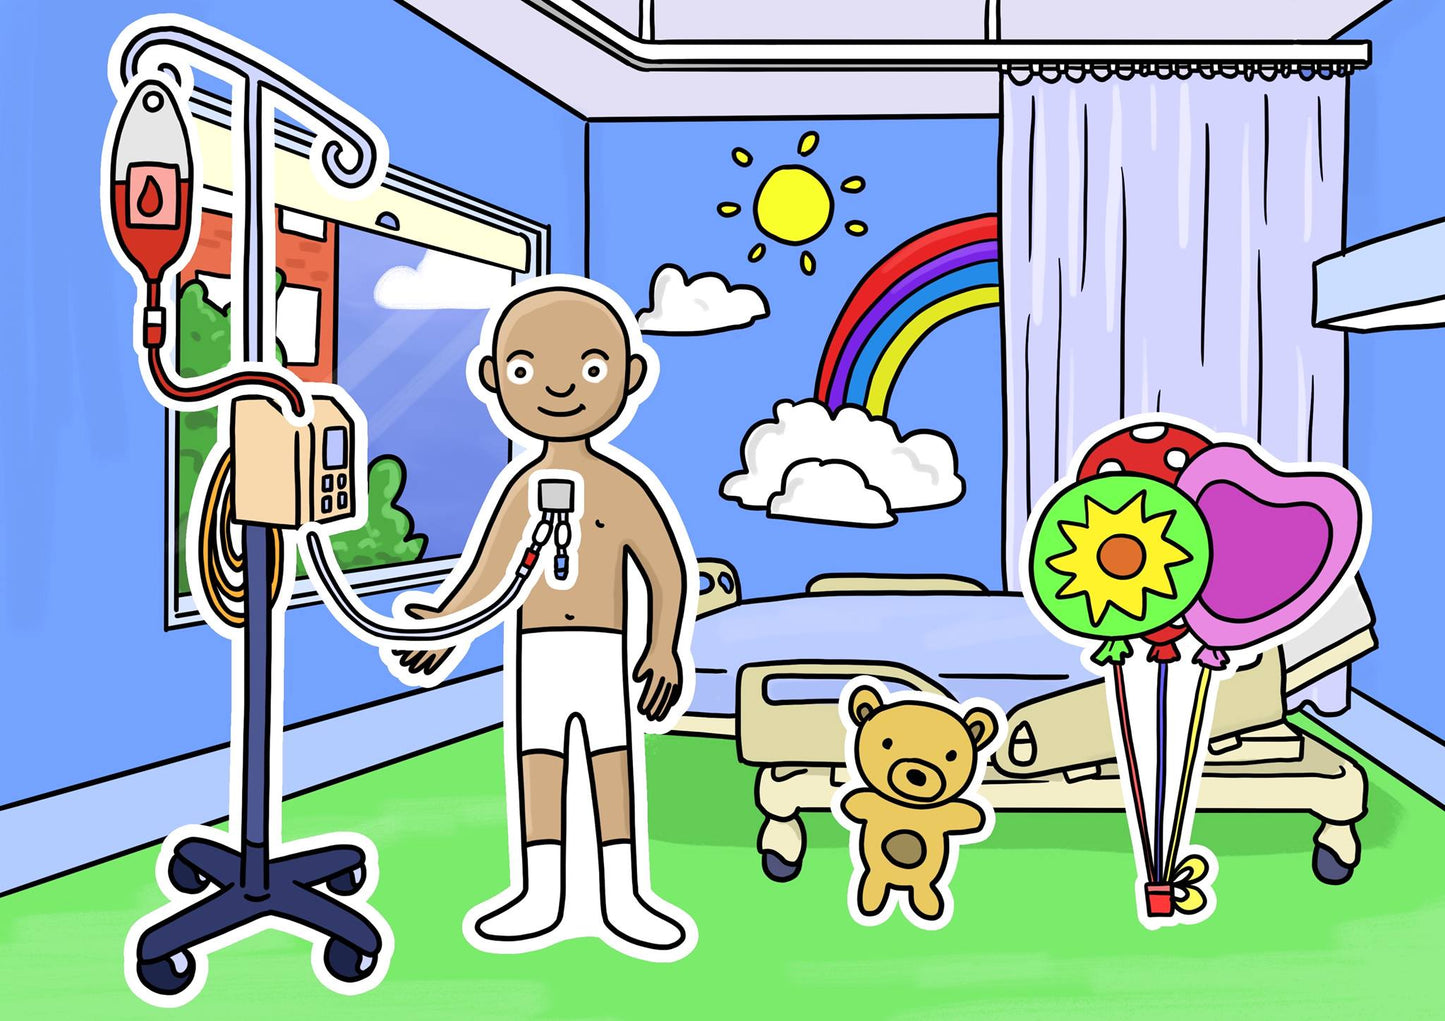 A child is receiving a blood transfusion into their chest port in a bright, happy hospital room. A teddy bear and get well balloons are beside them. A rainbow mural is on the hospital room wall.